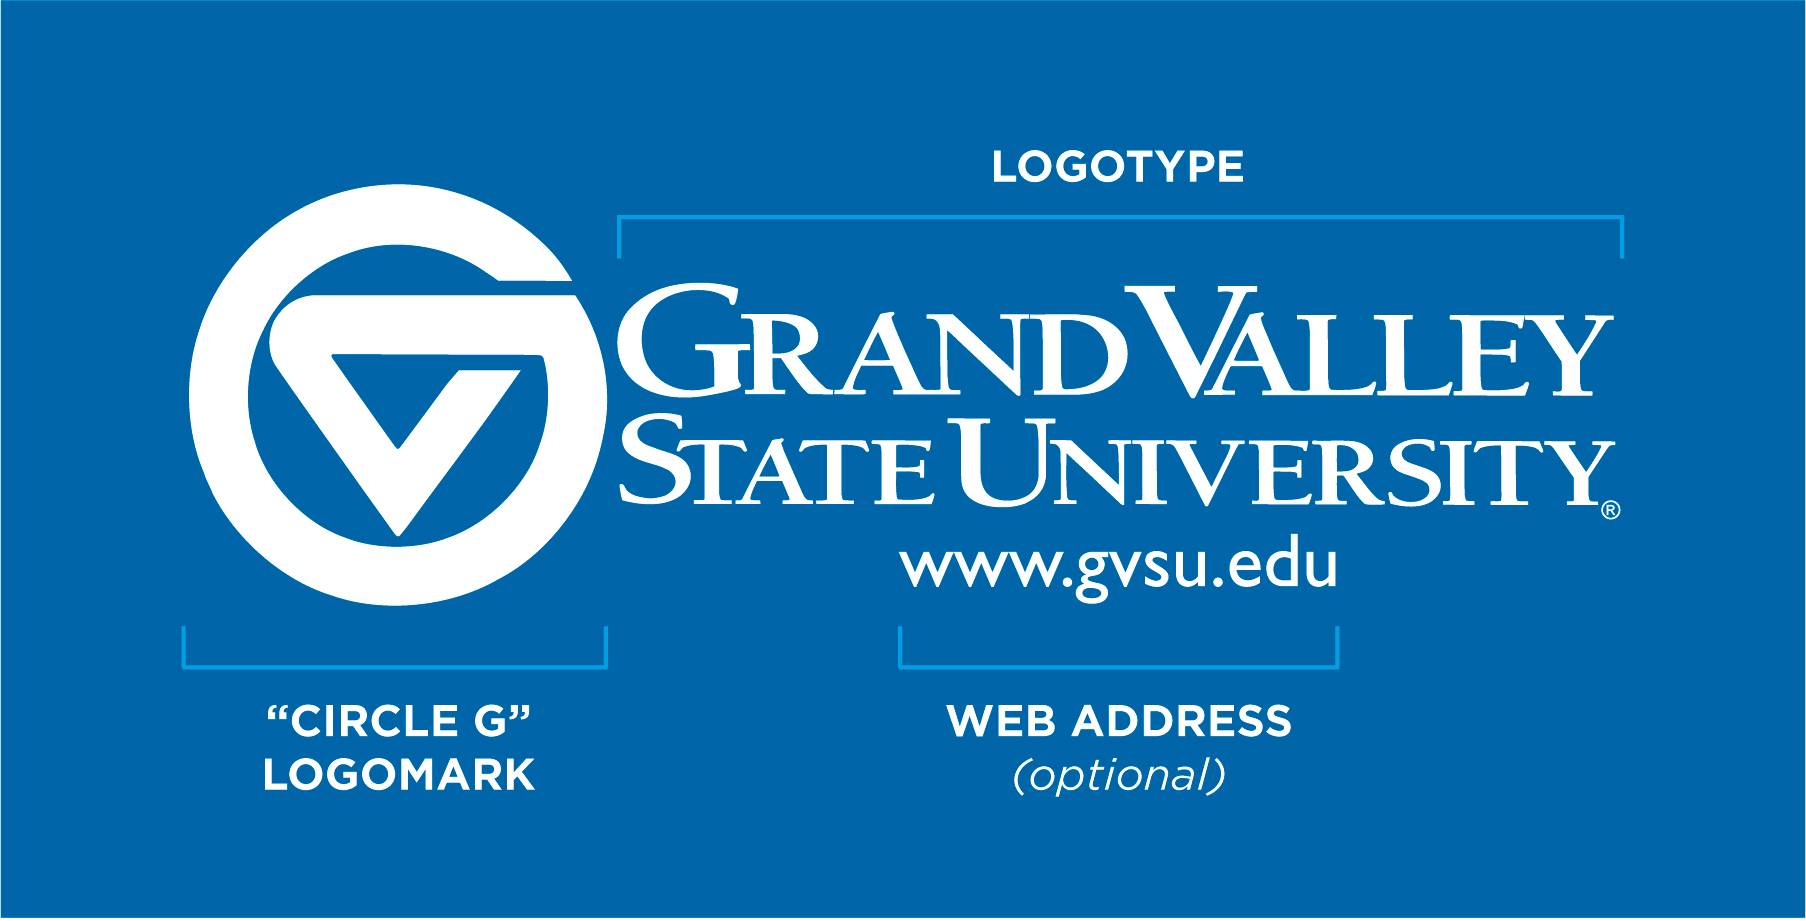 A bracket near the "circle G" is labeled "Circle G logomark". A bracket near the words "Grand Valley State University" in the logo is labeled "logotype". A bracket near the "www.gvsu.edu" is labeled "web address (optional)".